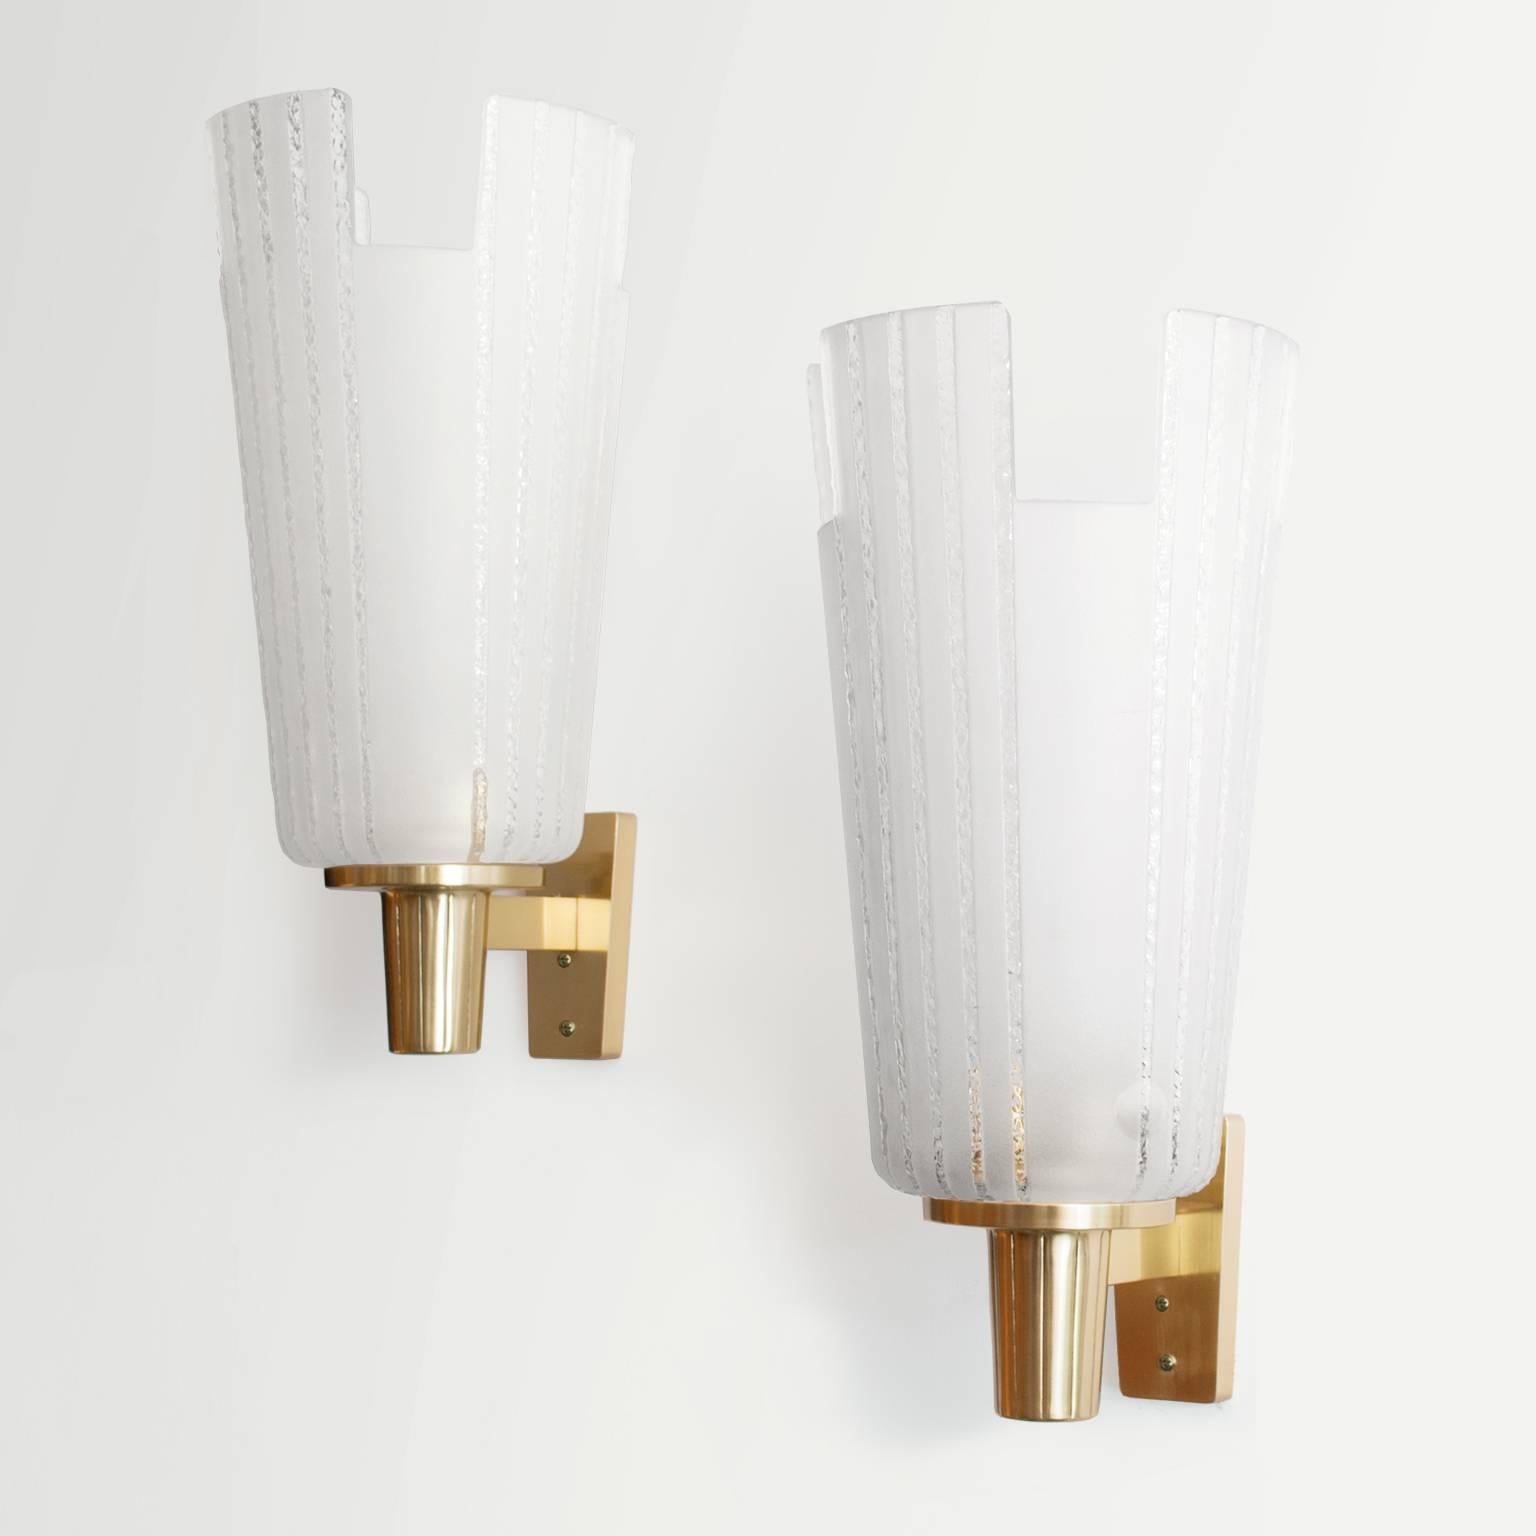 Large pair of Scandinavian Modern single-arm sconces made by Orrefors. Each sconce has a hand and acid etched glass shade with notched sections along the top. Polished brass arms extend from and easily mounted wall plaque. Impressive in scale and